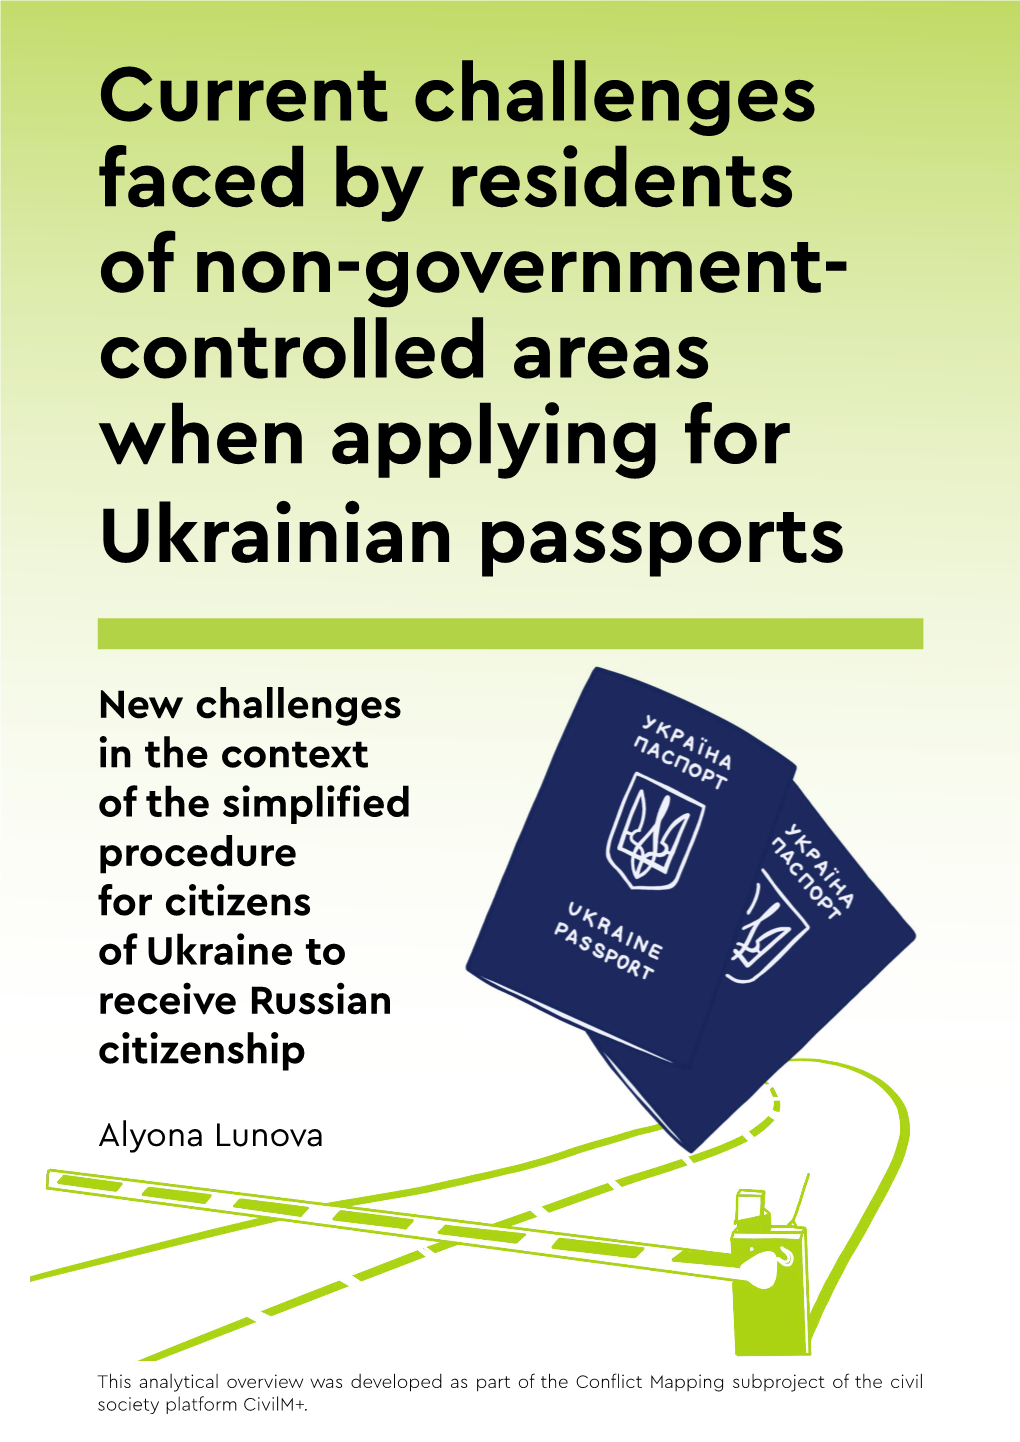 Controlled Areas When Applying for Ukrainian Passports